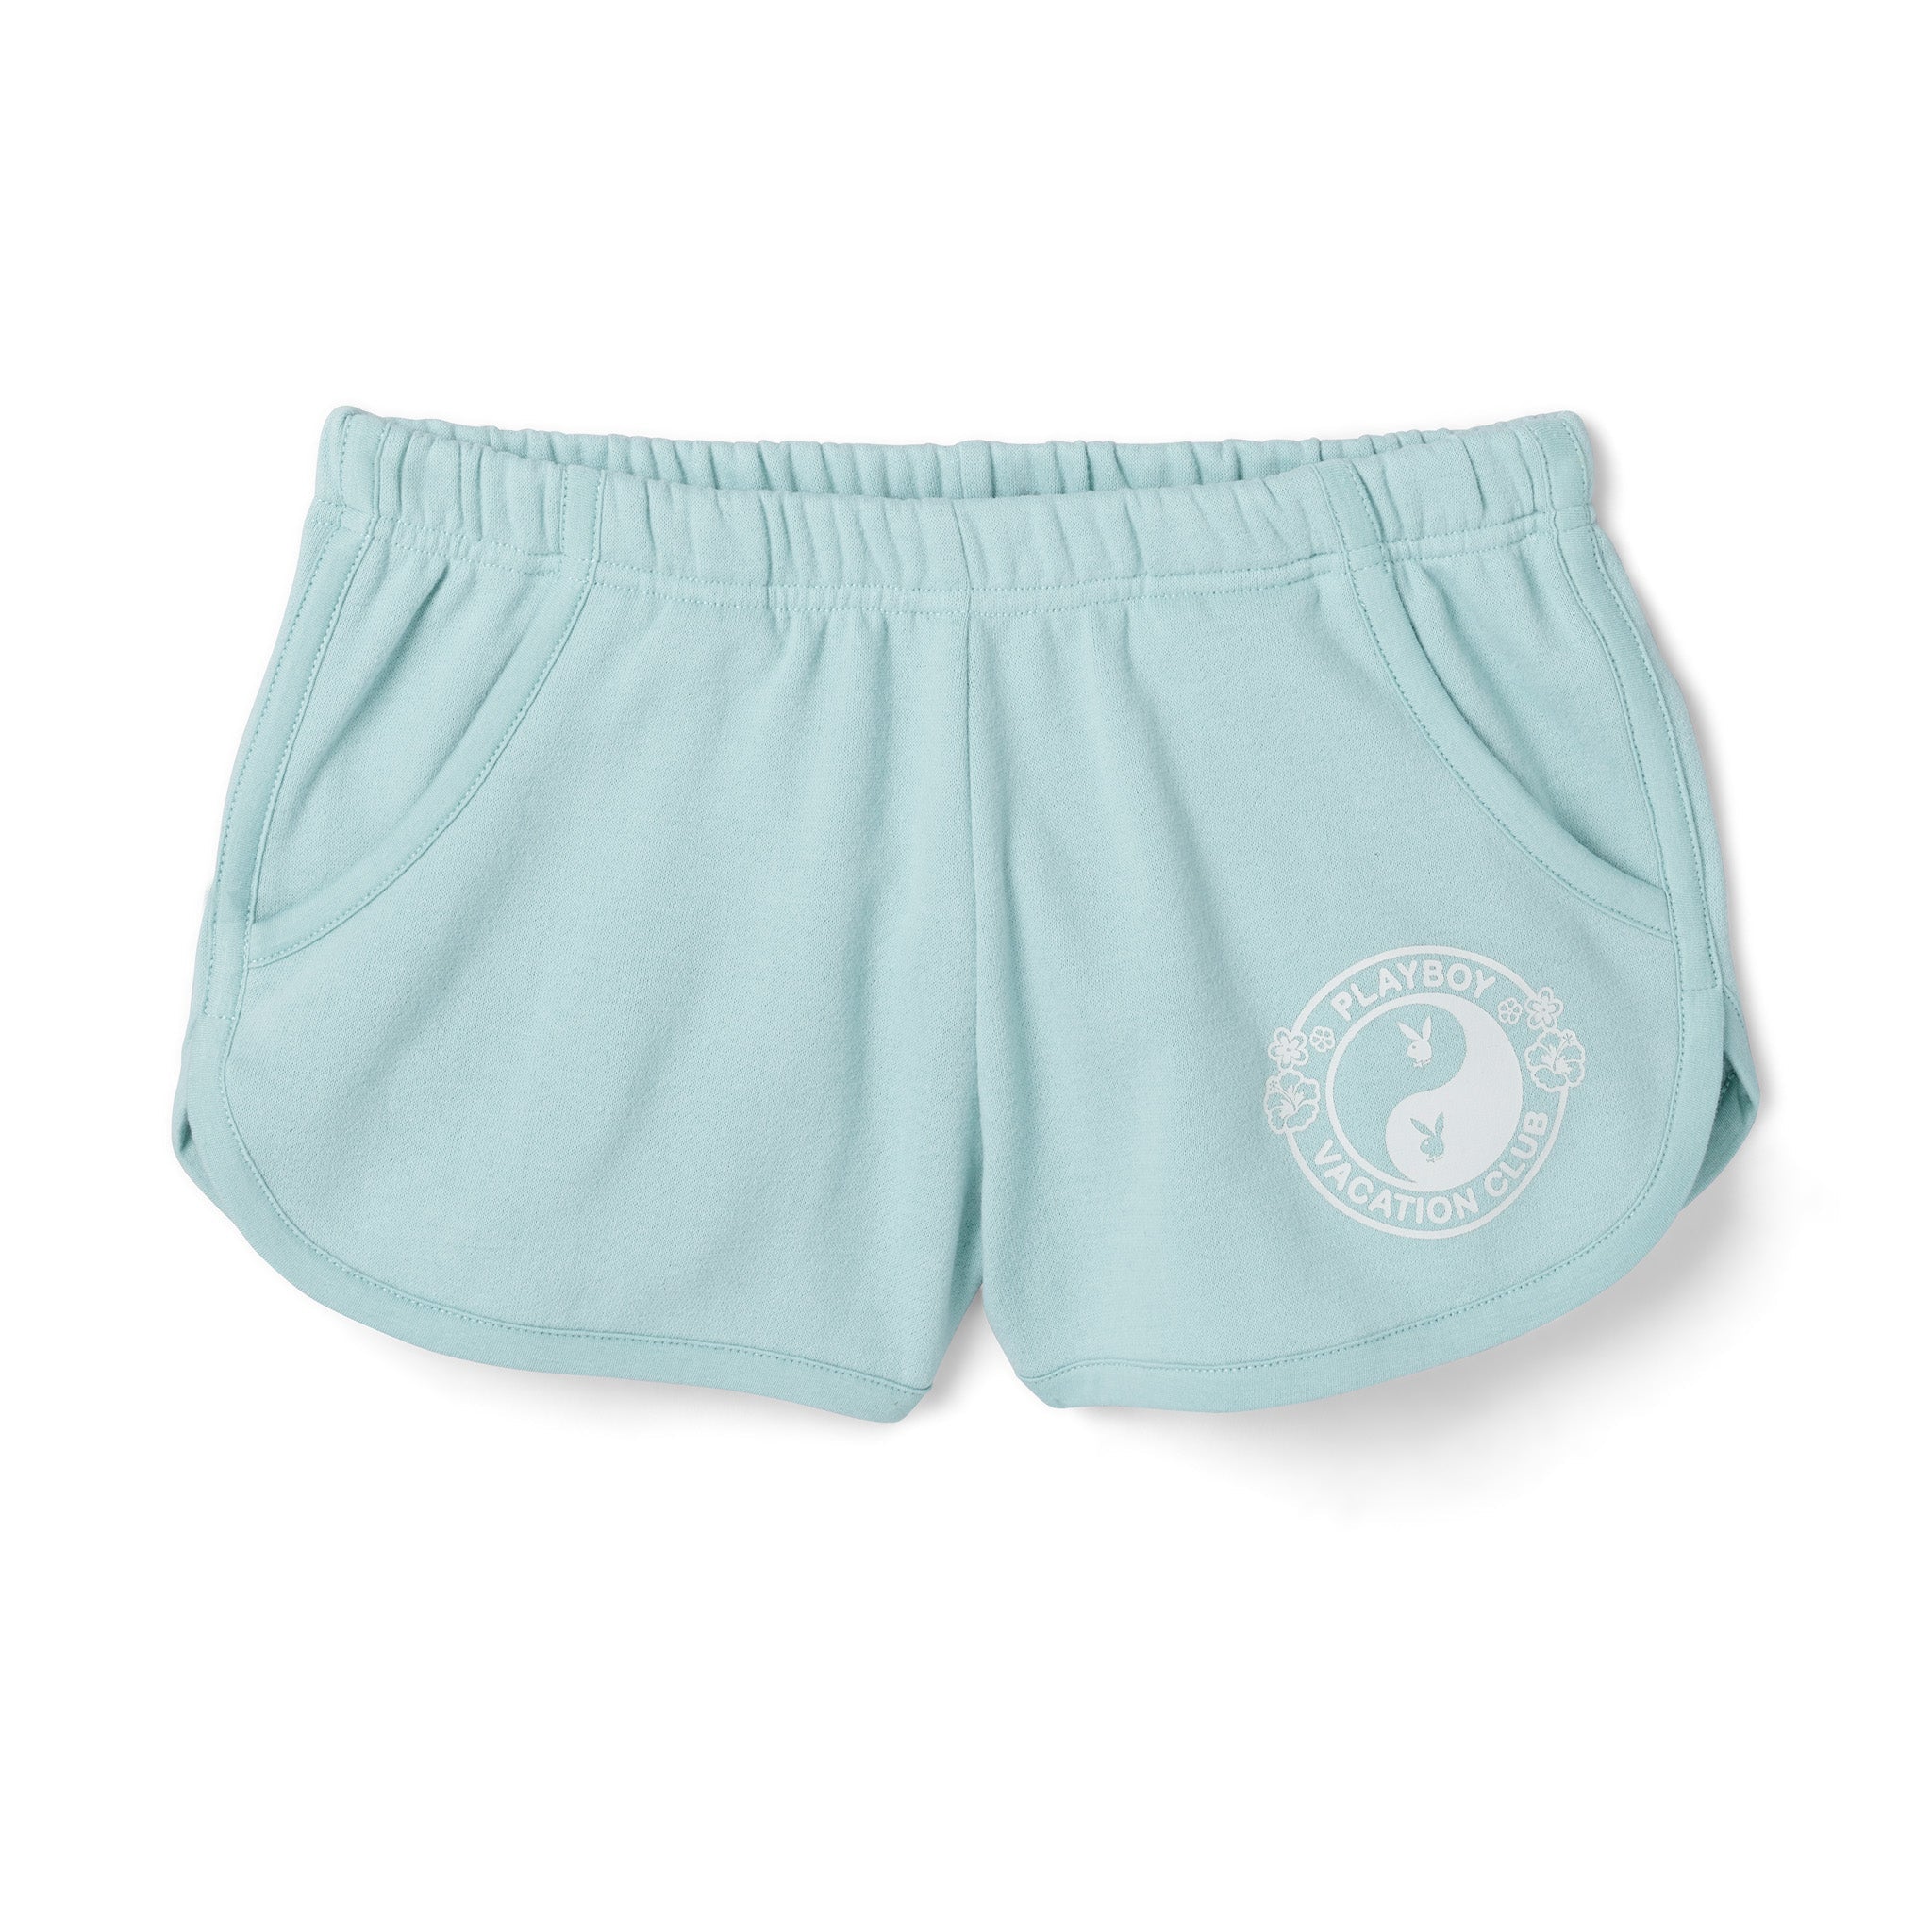 Women's Wipeout Dolphin Shorts